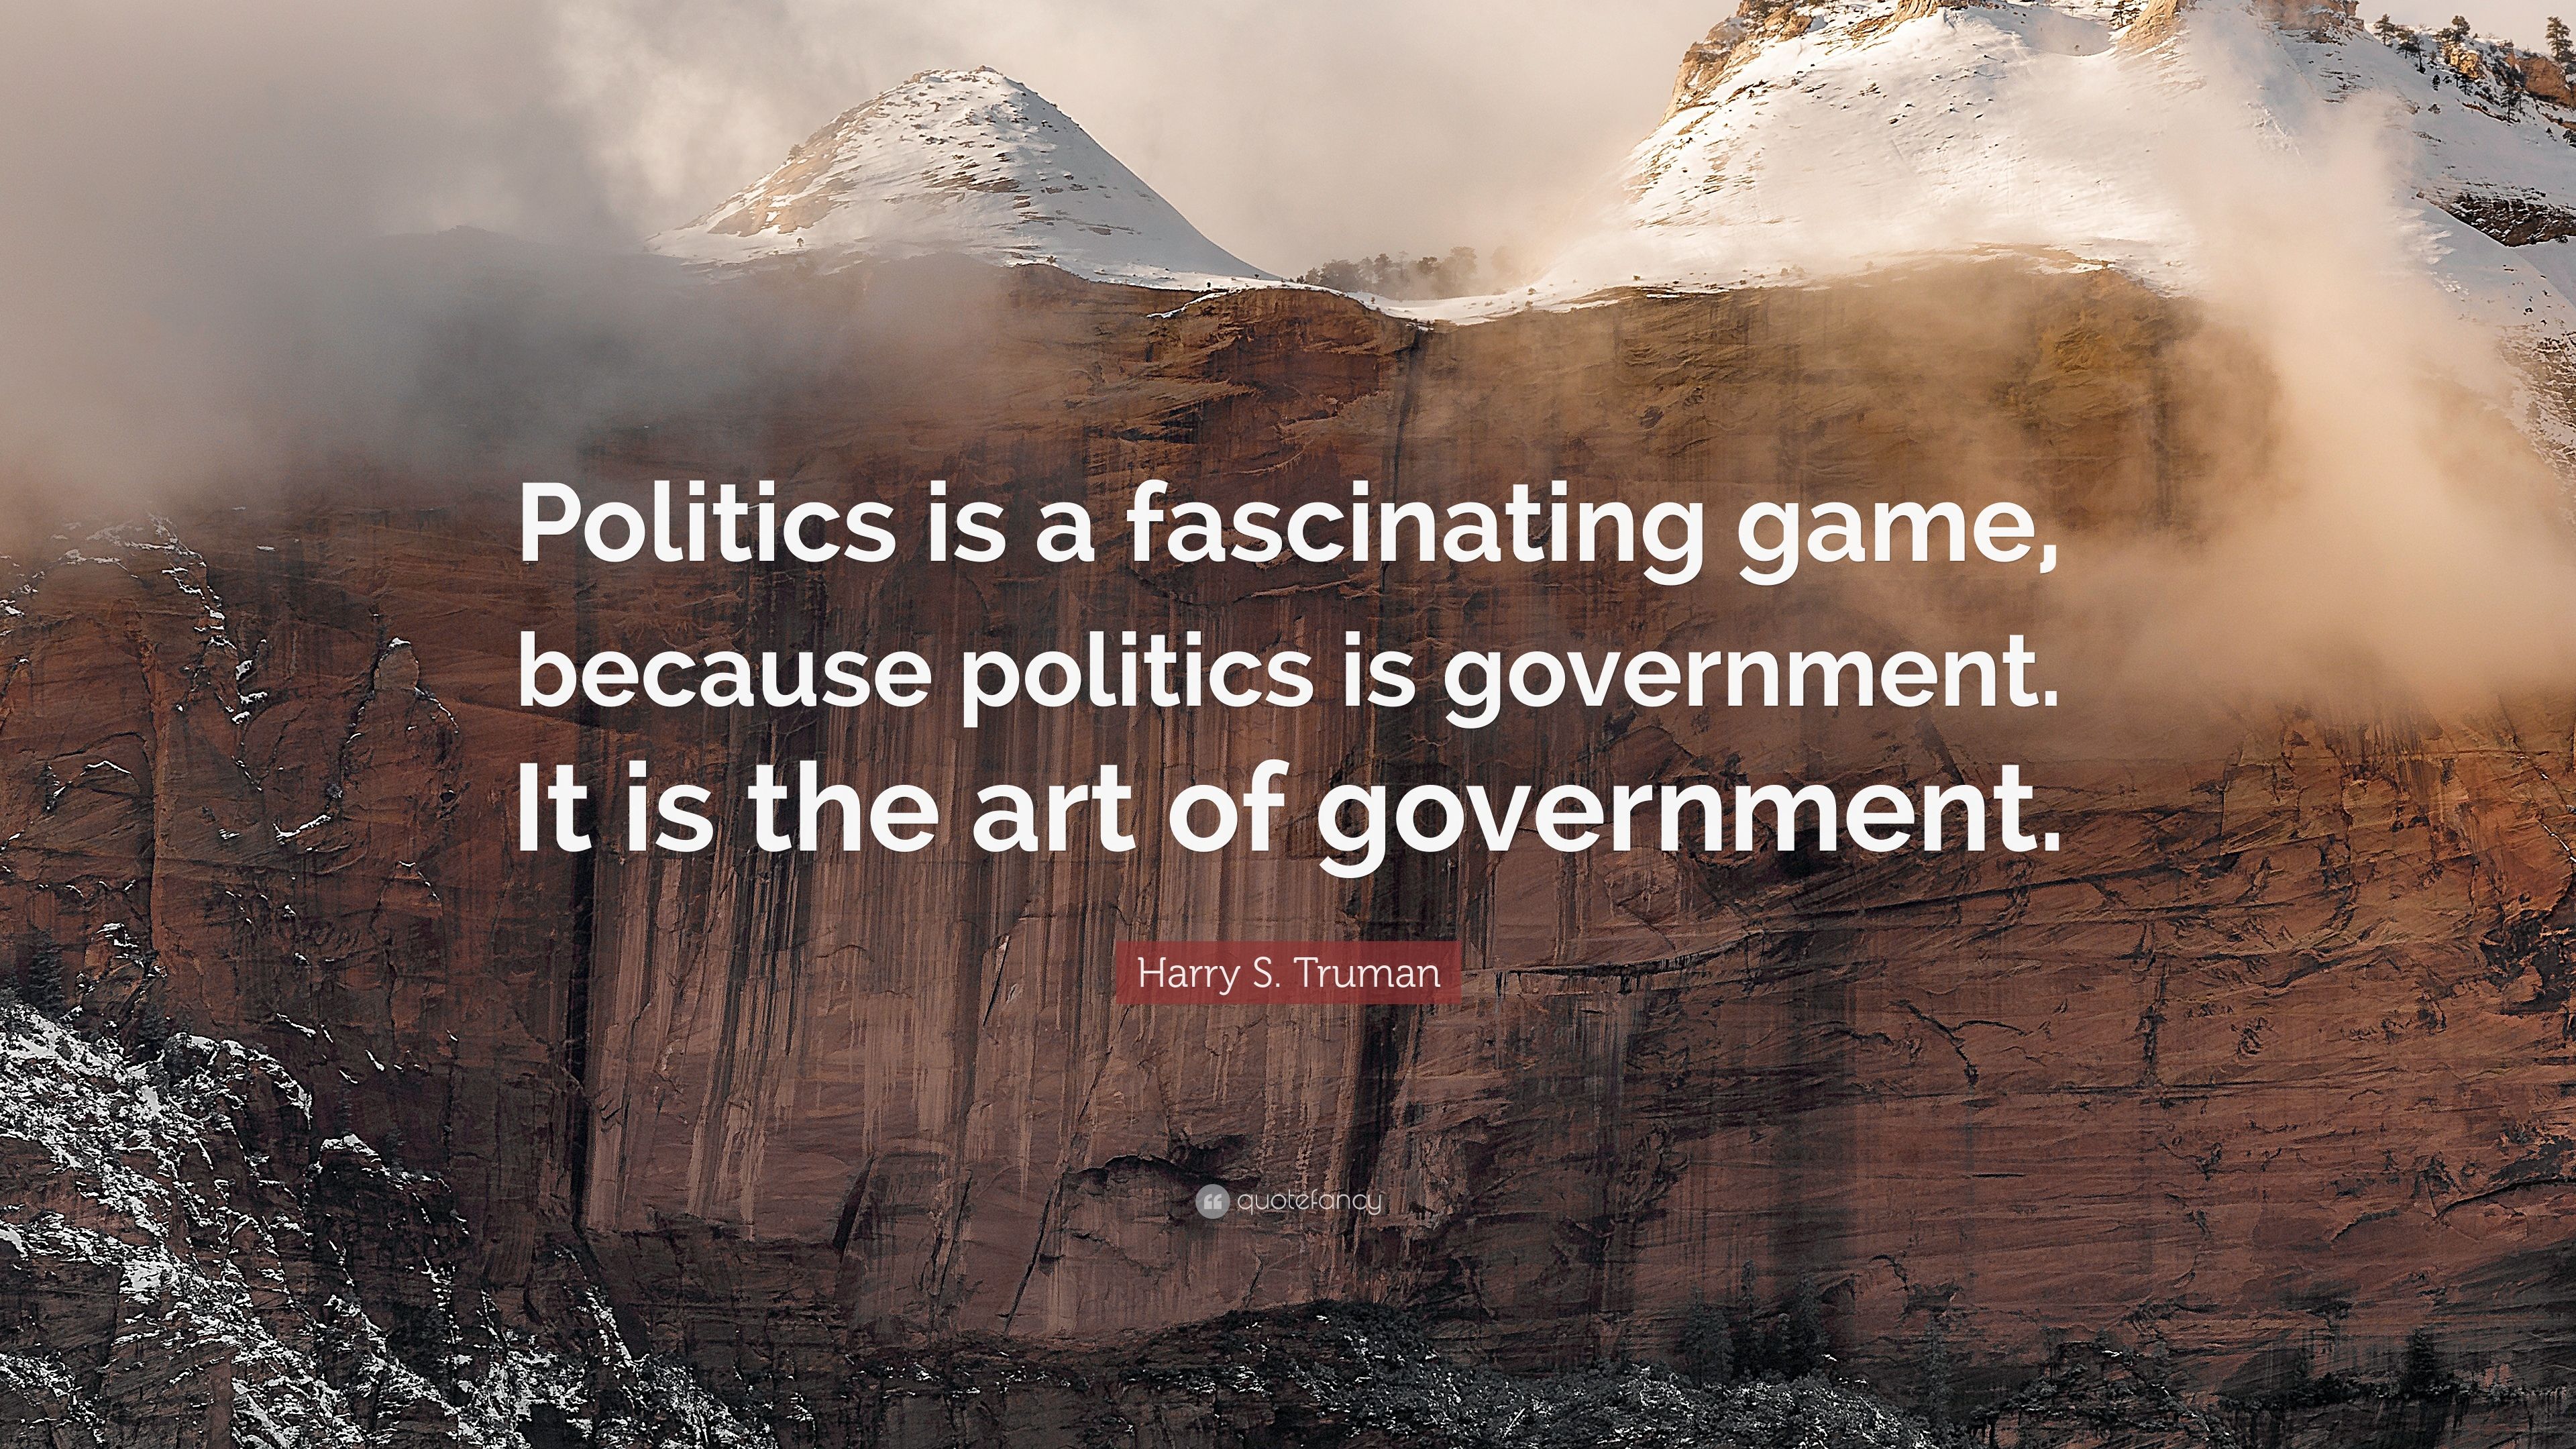 Harry S. Truman Quote: “Politics is a fascinating game, because